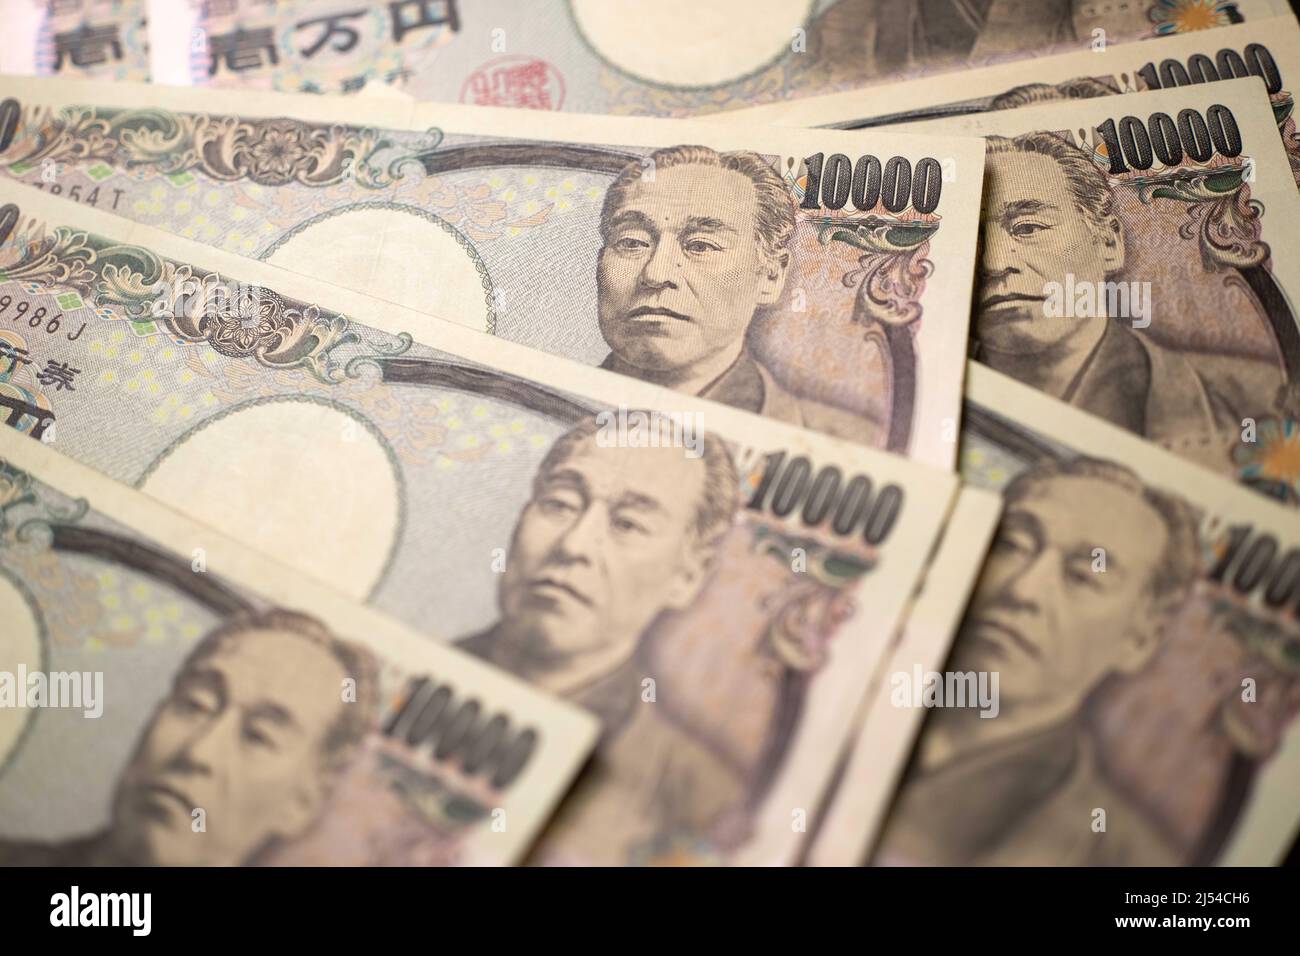 Tokyo. 20th Apr, 2022. Photo taken on April 20, 2022 shows the Japanese yen in Tokyo, Japan. The Japanese yen has weakened markedly this year as major central banks in Europe and the United States have shifted monetary policies. Credit: Zhang Xiaoyu/Xinhua/Alamy Live News Stock Photo